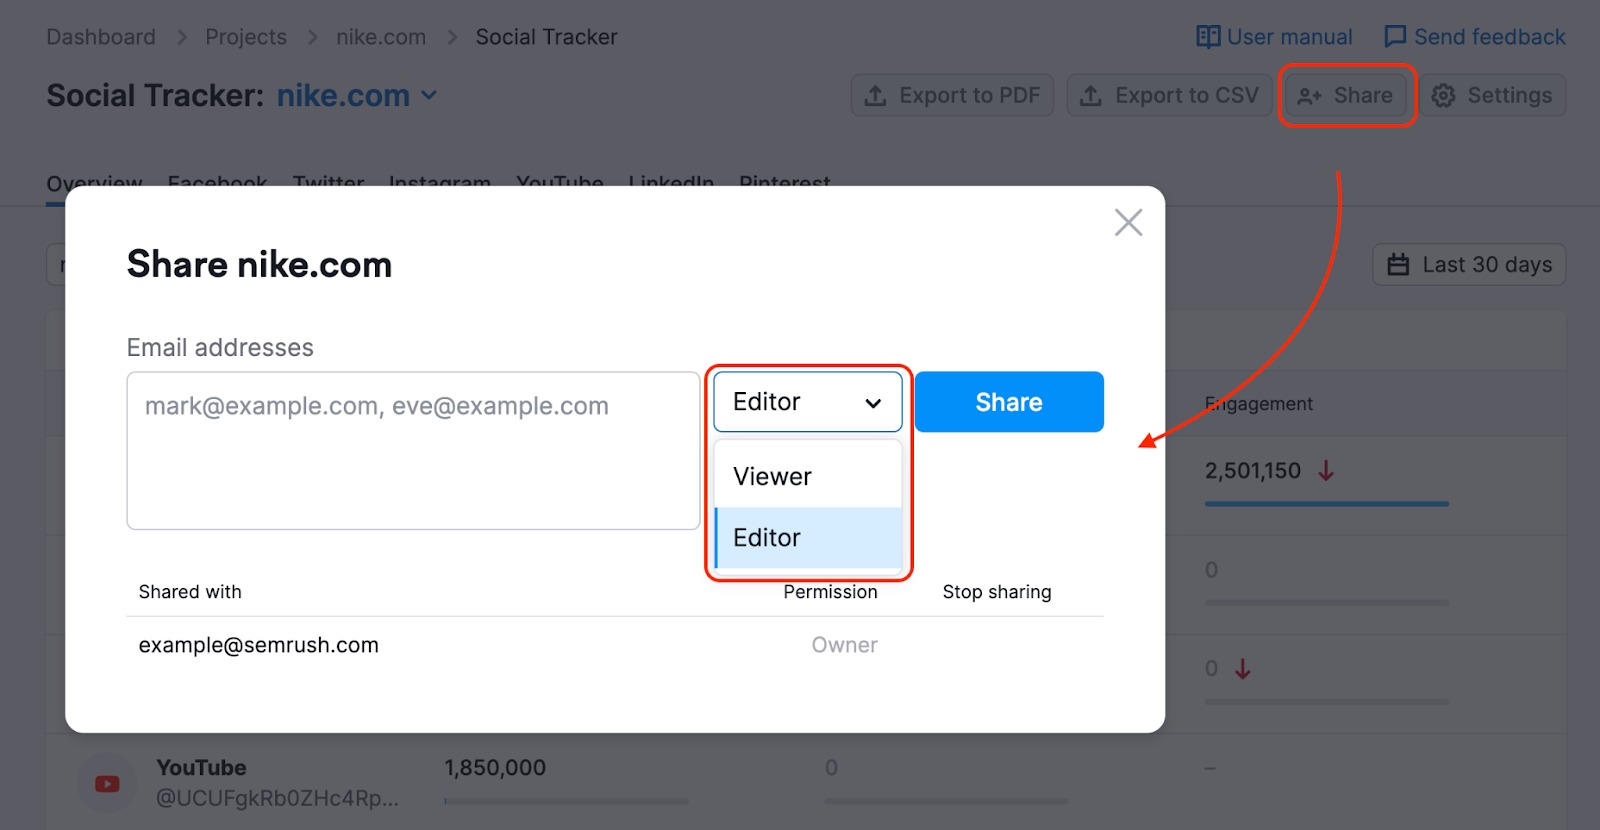 How to share a project from Social Tracker. A red rectangle is highlighting the Share button in the top-right corner, after clicking the button a pop-up window with sharing options appears. 